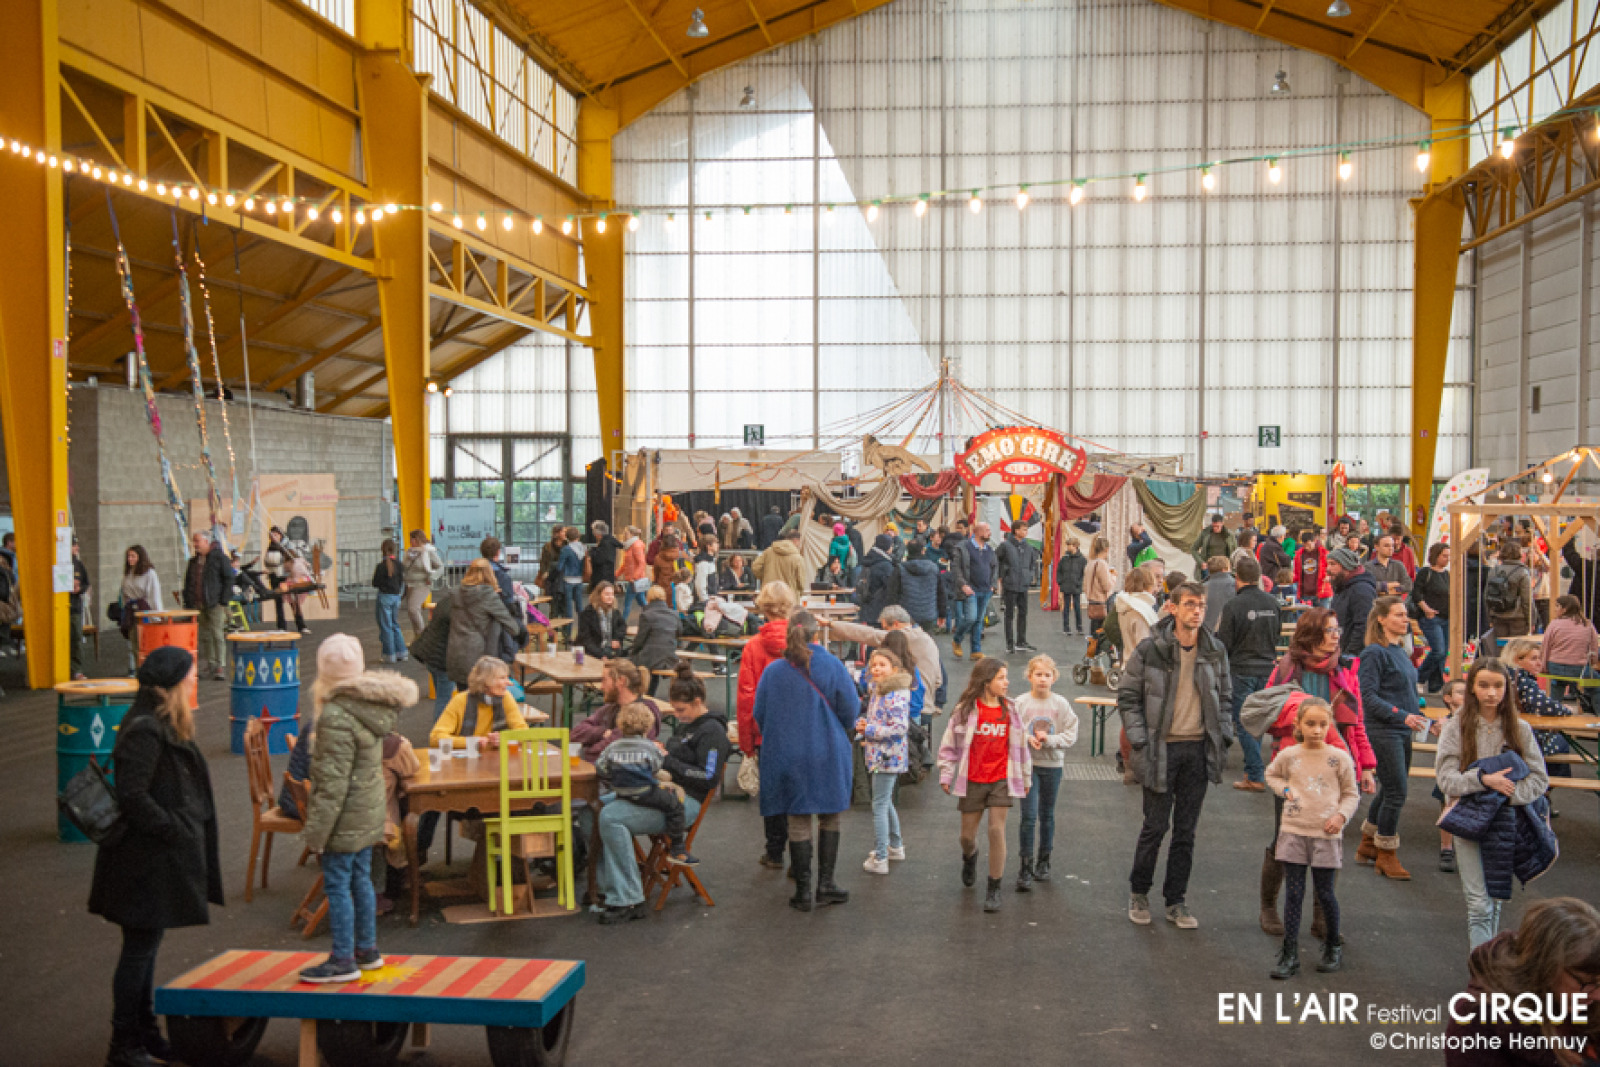 Festival-goers in a hangar where different circus stands are arranged